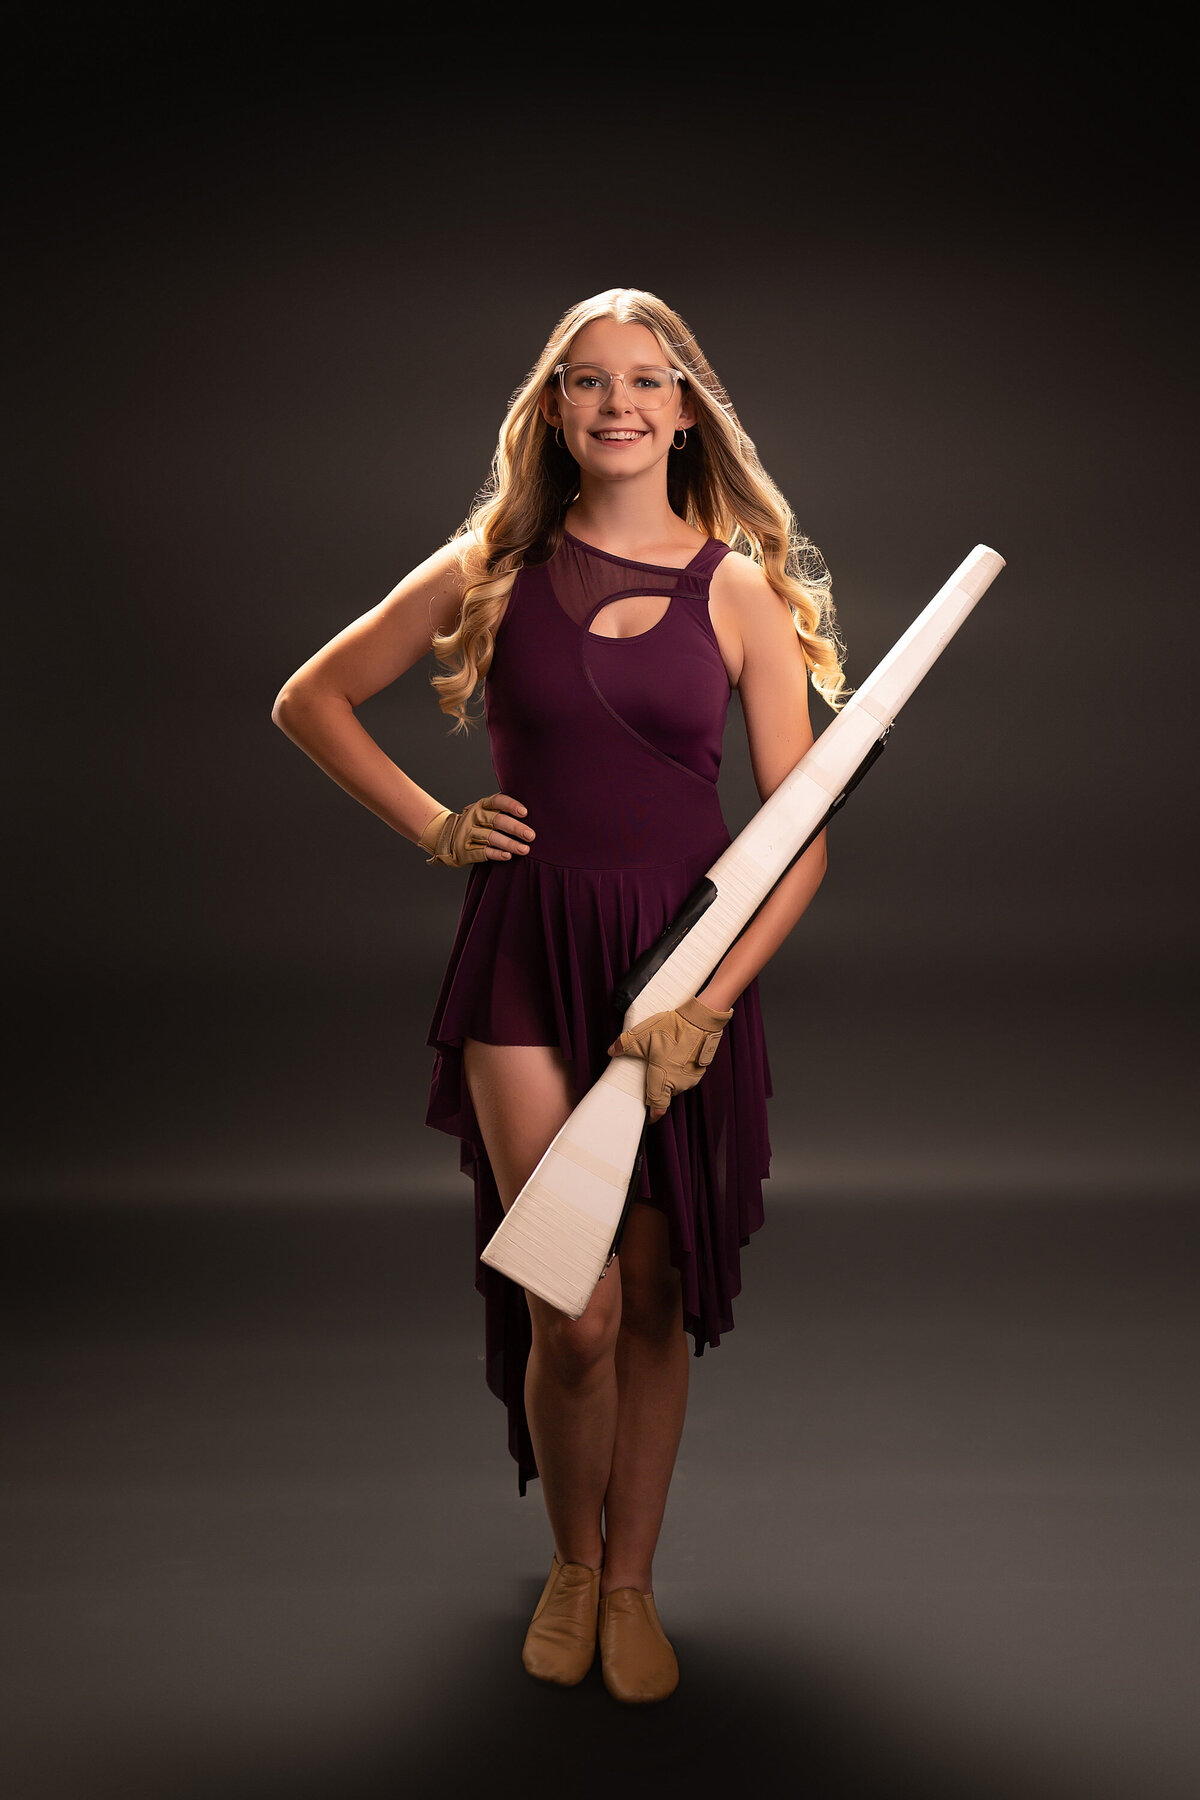 A member of the Arrowhead drill team poses for her senior portraits in our Waukesha studio wearing her uniform.